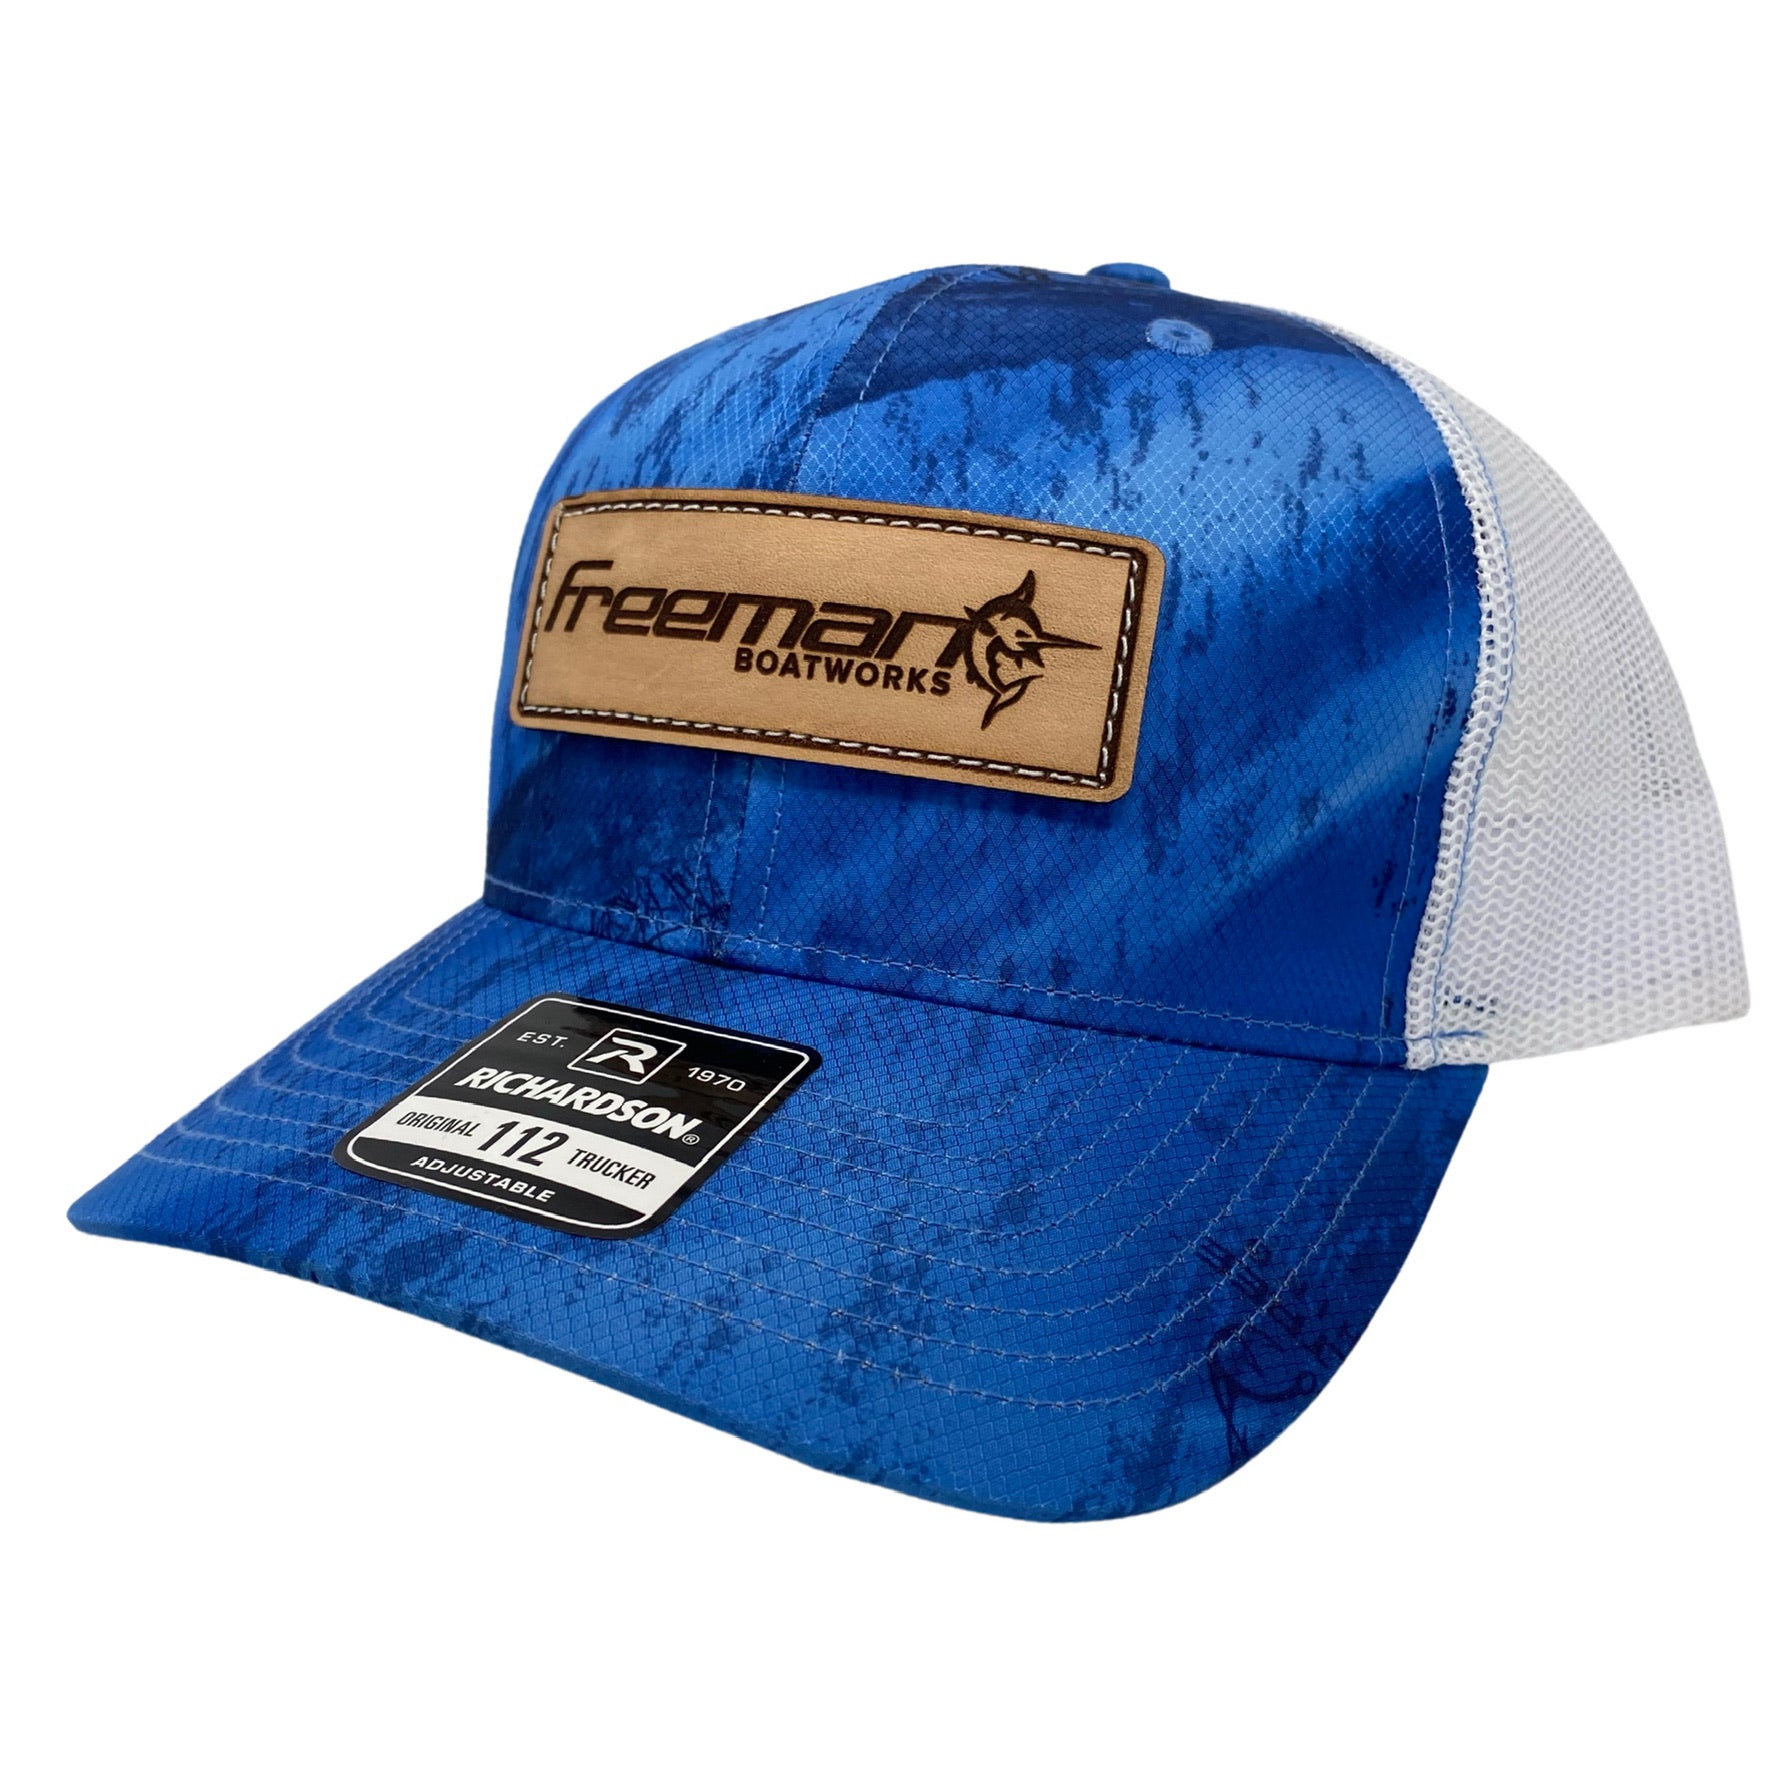 Freeman Boatworks Leather Patch Trucker - Limited Edition